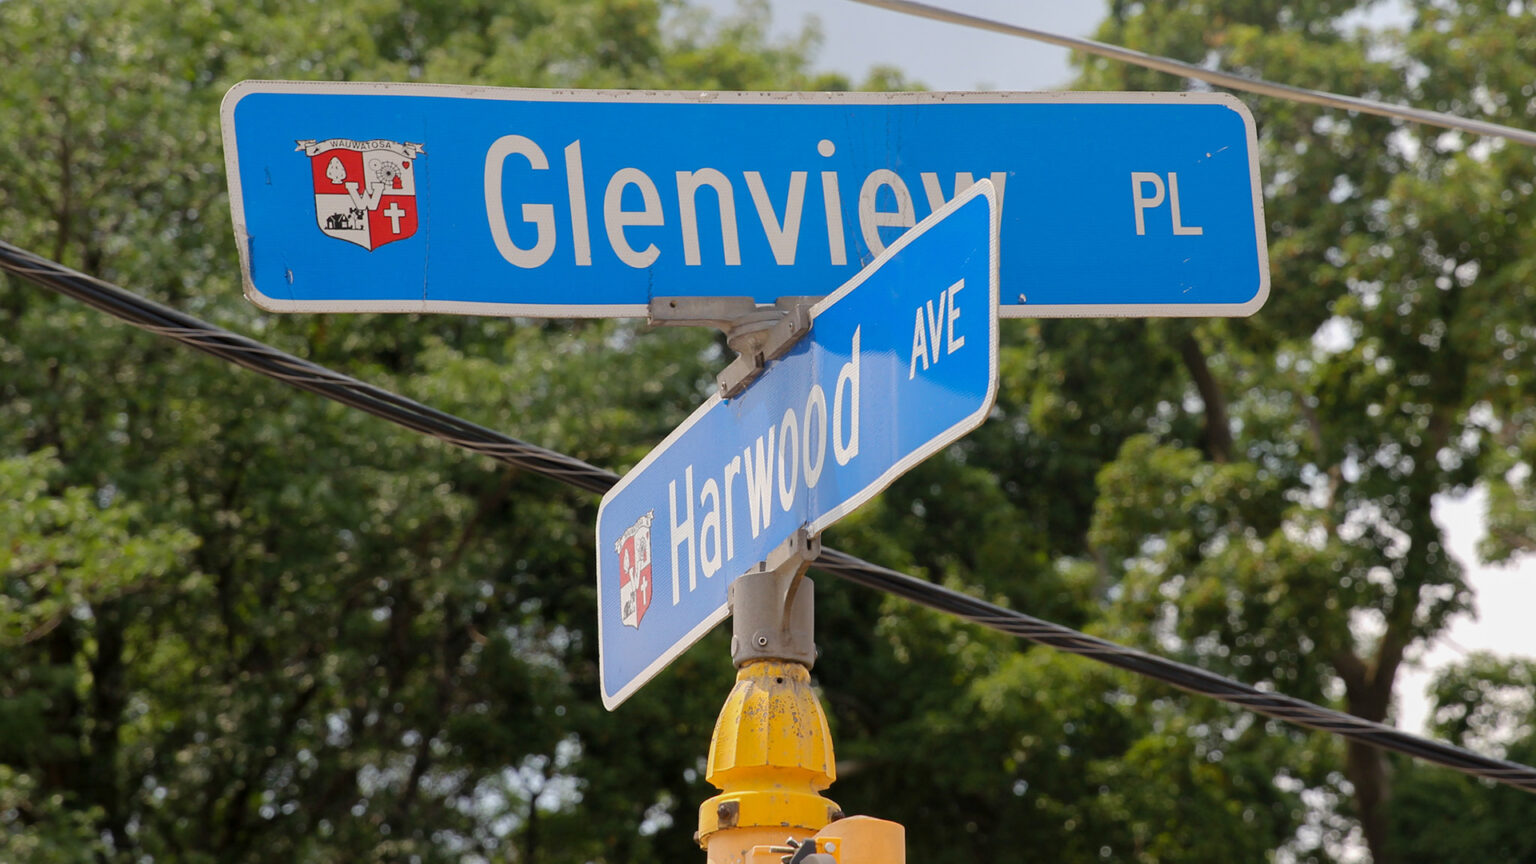 Two street signs with the Seal of Wauwatosa and the words Glenview PL and Harwood AVE stand at right angles to each other atop a metal pole, with power lines and out-of-focus trees in the background.